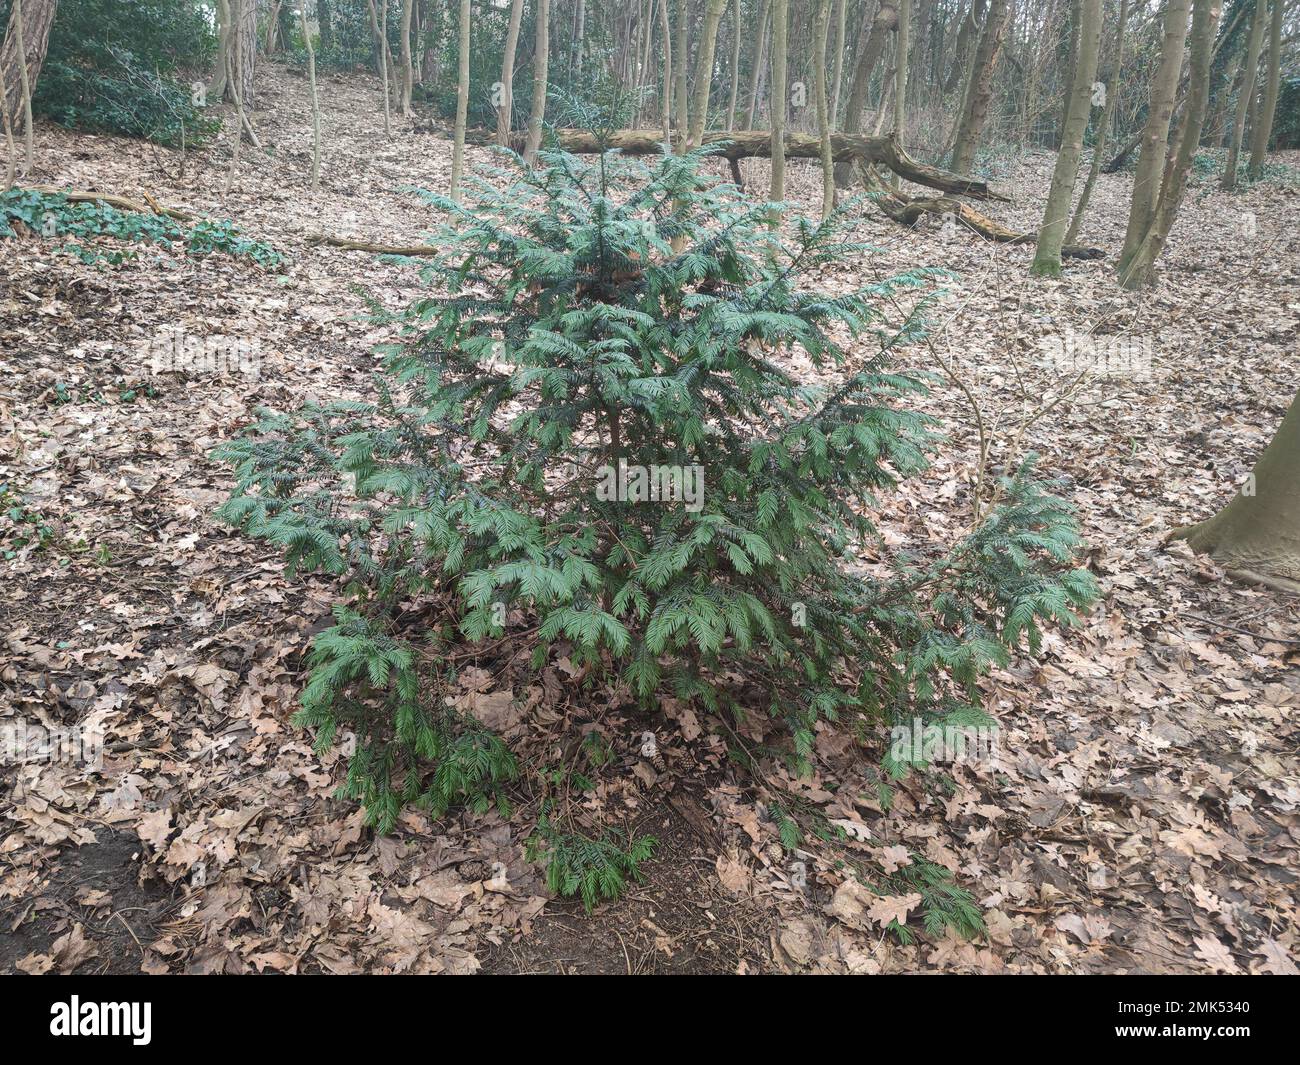 Young specimen of a Yew tree (Taxus baccata) growing in the shade below other trees in a forest Stock Photo